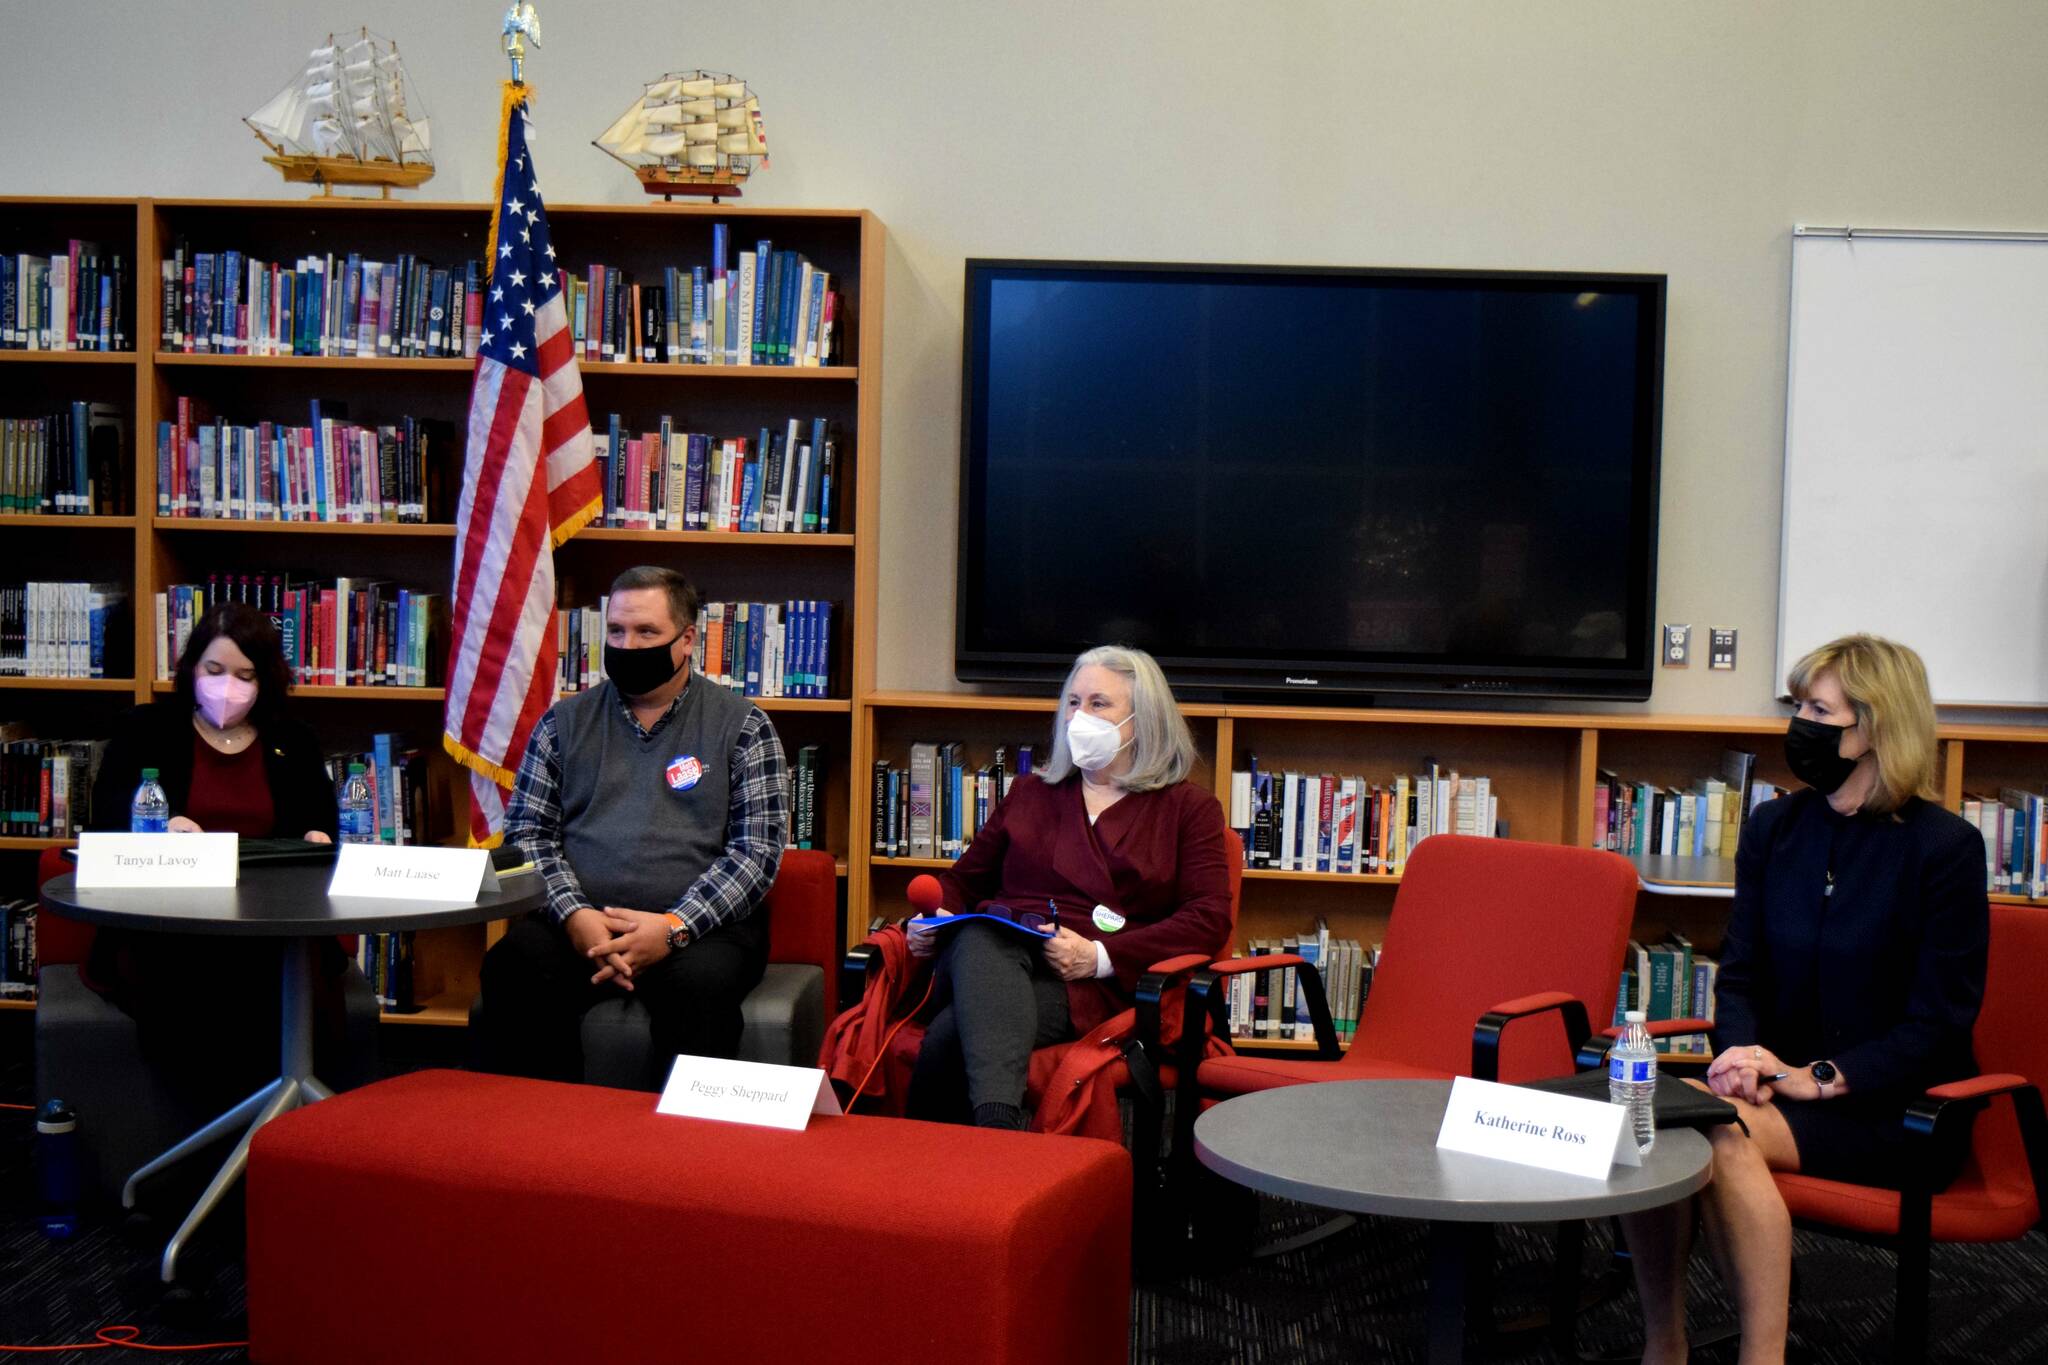 Snoqualmie mayor and city council candidates at the Snoqualmie Valley Chamber of Commerce candidate forum. From left: Council candidates Tanya Lavoy and Matt Laase. Mayor candidates: Peggy Shepard and Katherine Ross. Photo by Conor Wilson/Valley Record